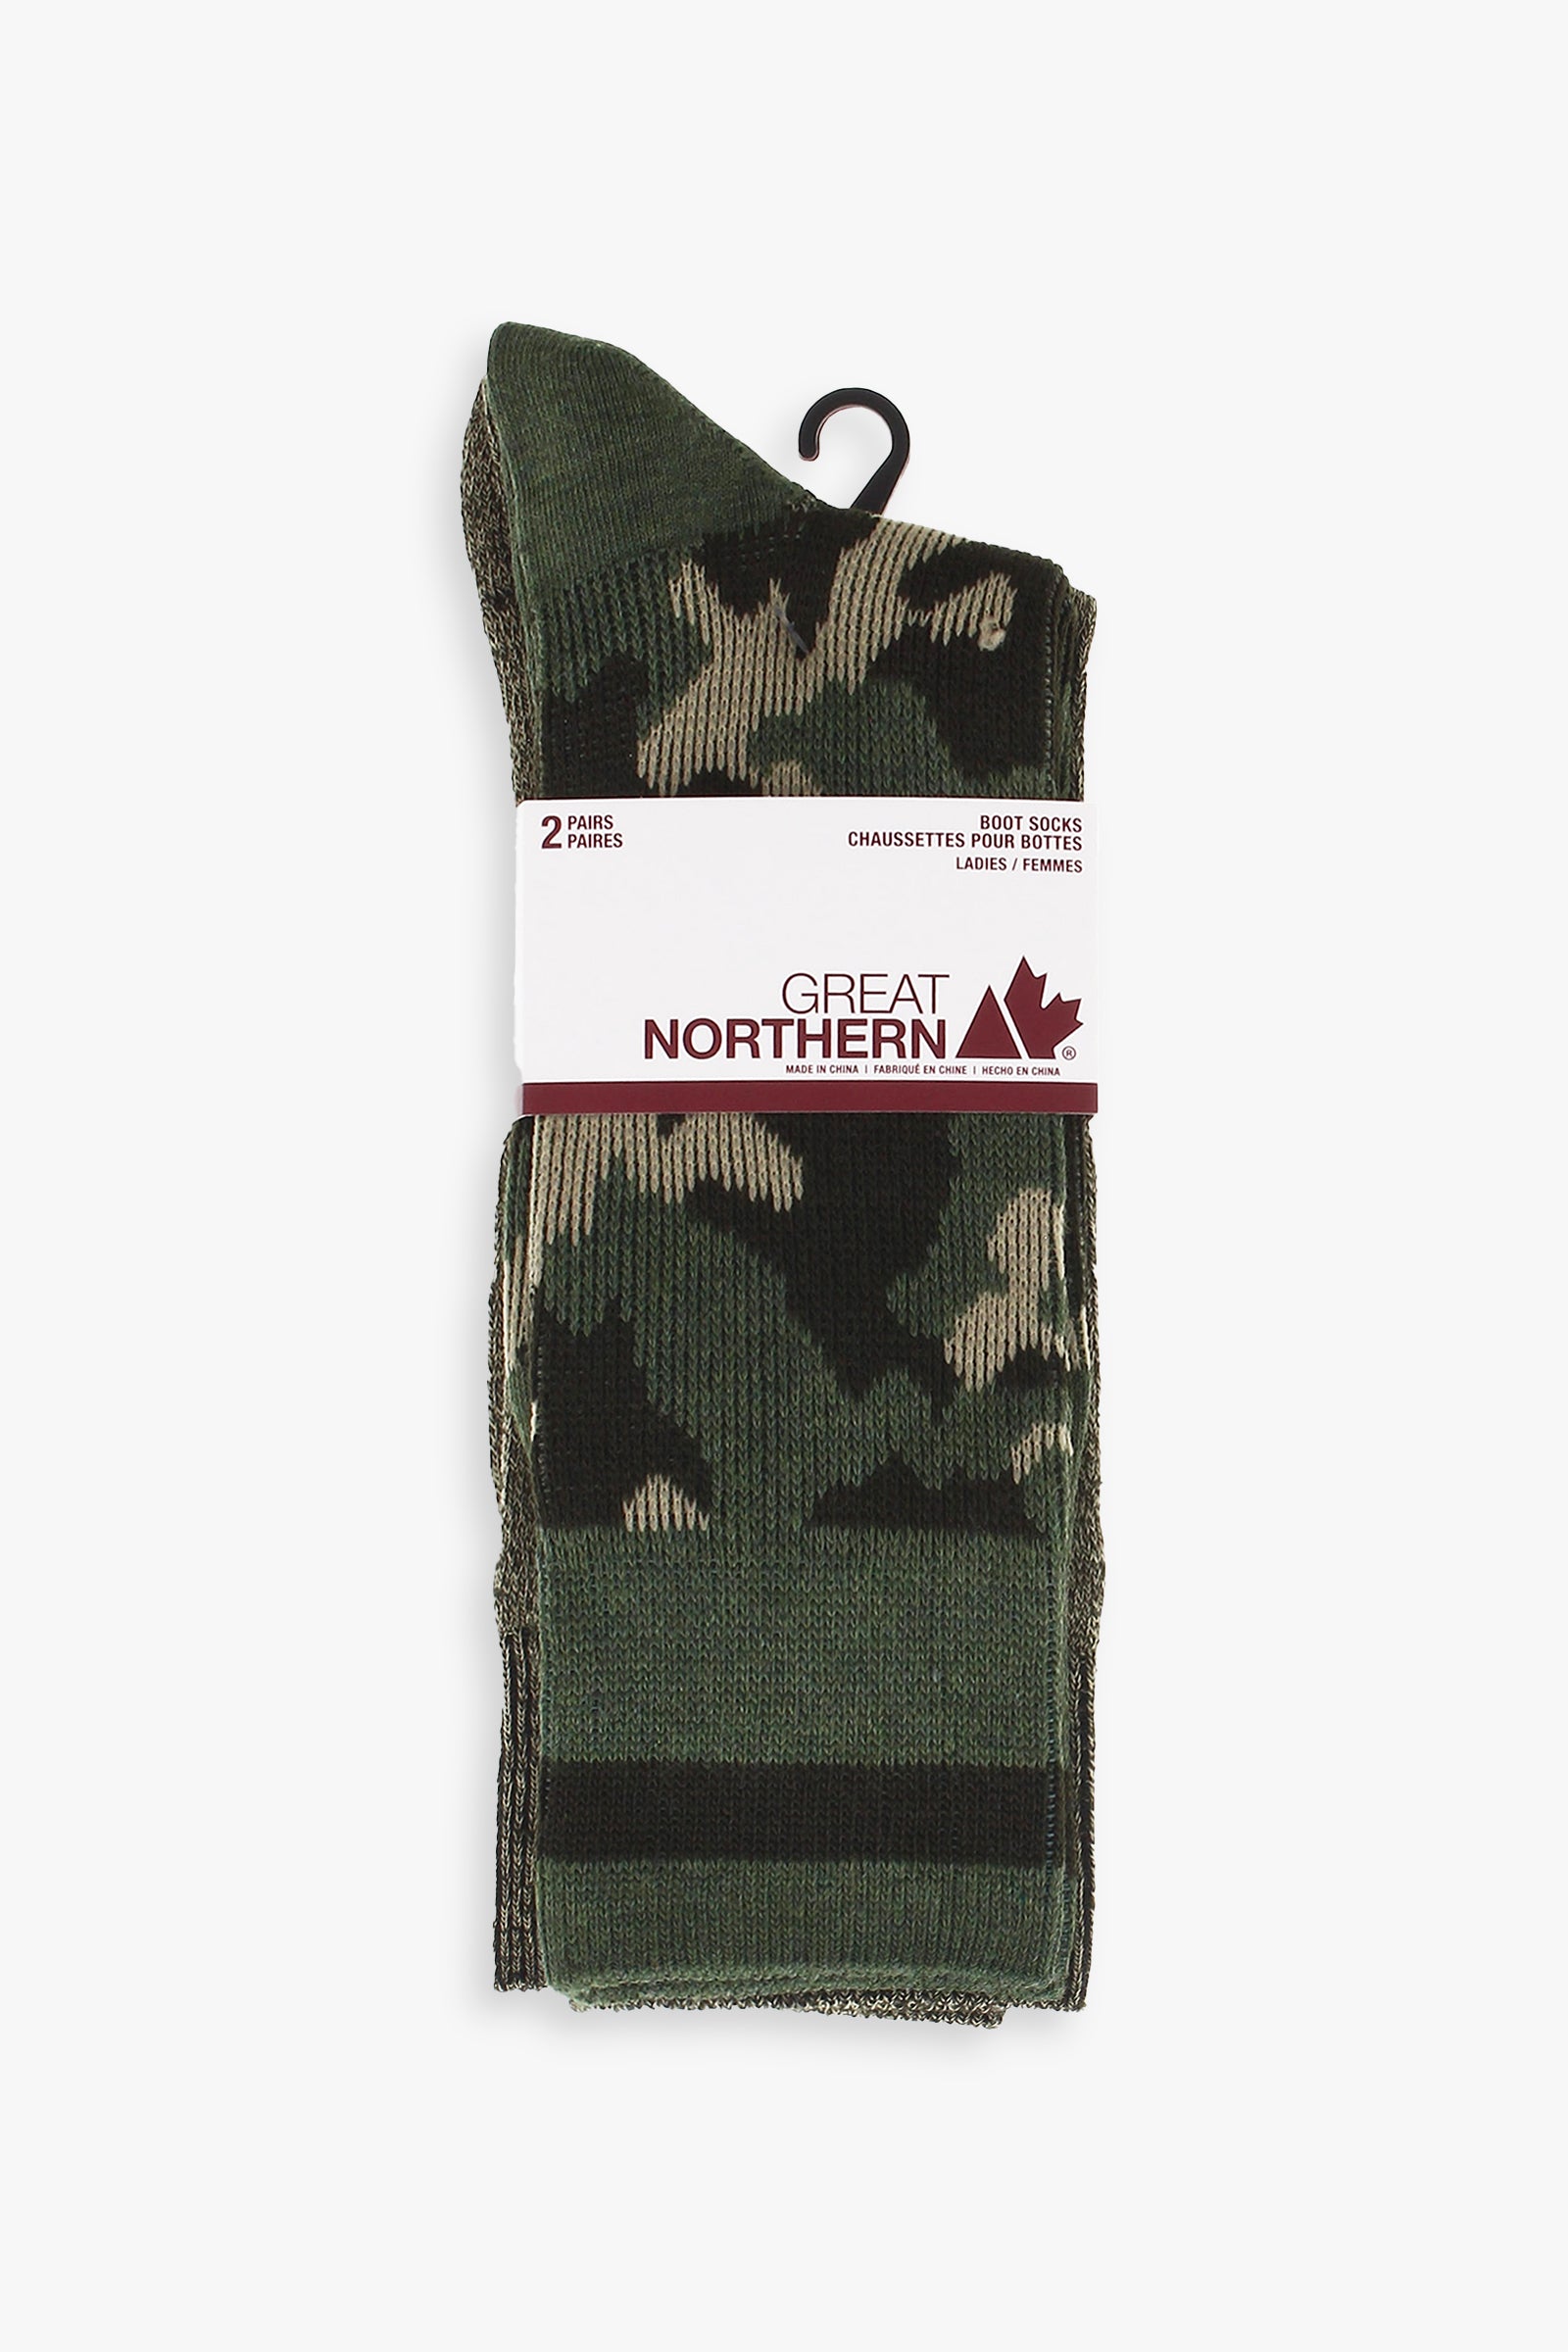 Great Northern Ladies 2 Pack Camouflage Boot Socks